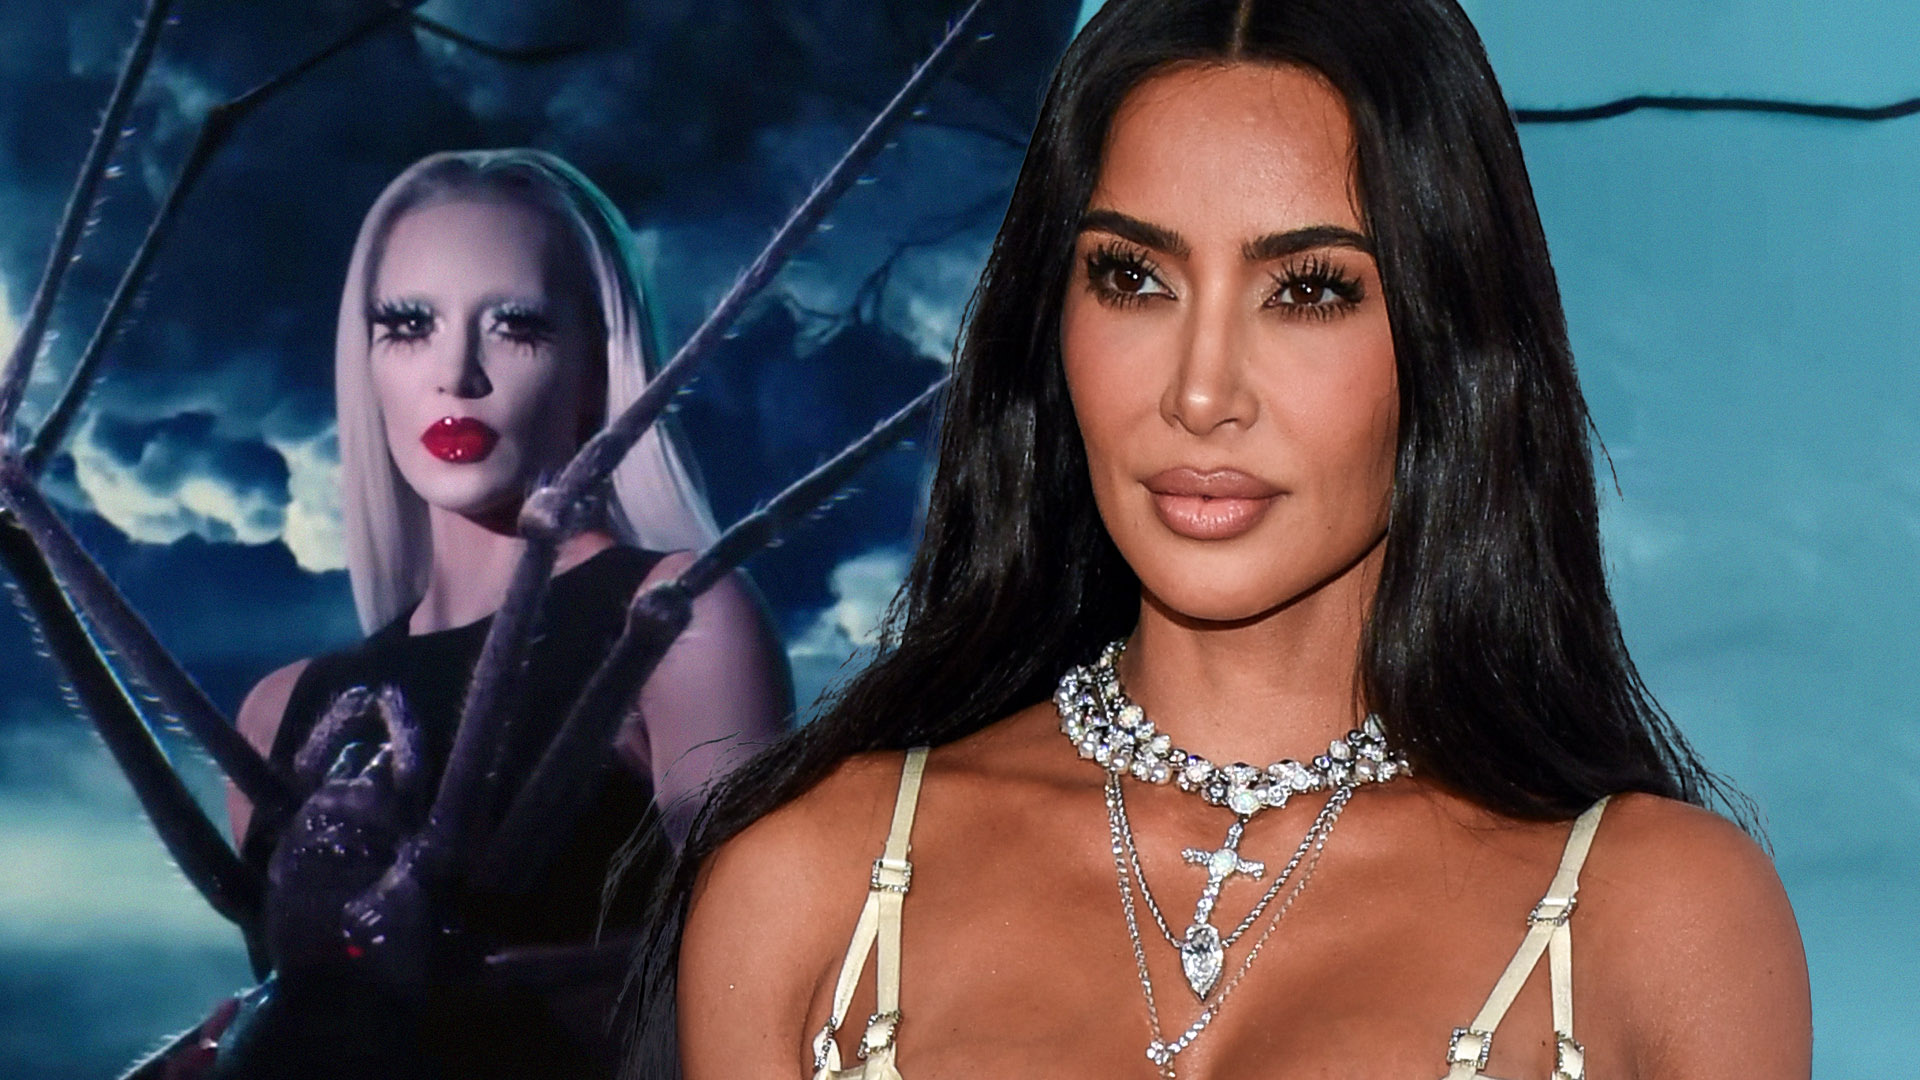 Is Kim Kardashian's Acting in American Horror Story Really That Bad?